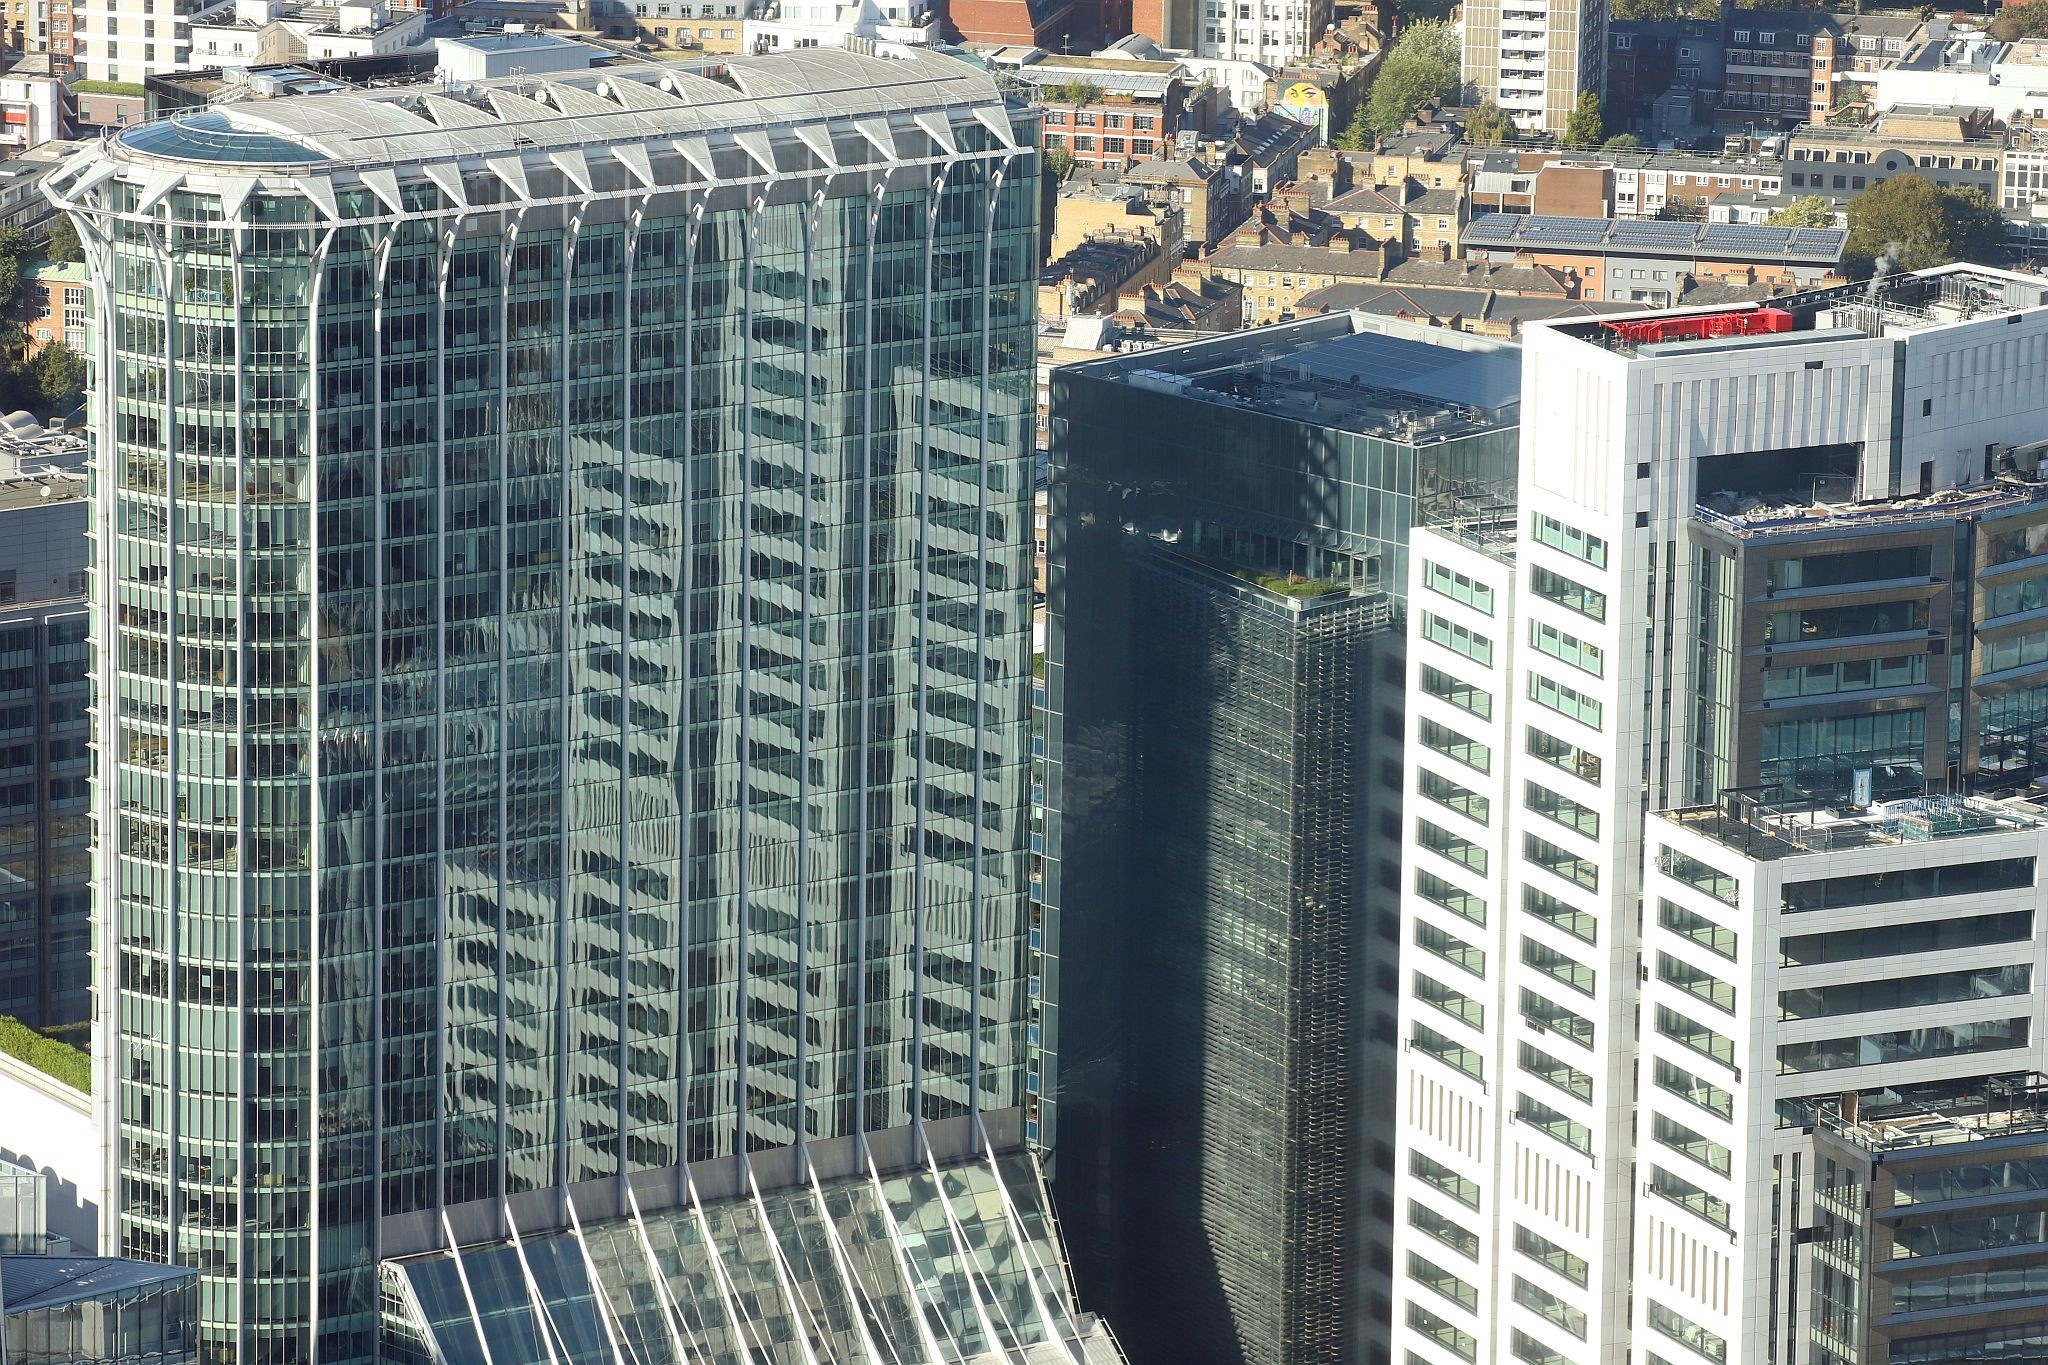 Aerial view of office buildings reflecting in the Citypoint Tower, City of London. View from the Horizon observation platform on the 58th floor of 22 Bishopsgate in the City of London. Photo taken on 15-Oct-2023.